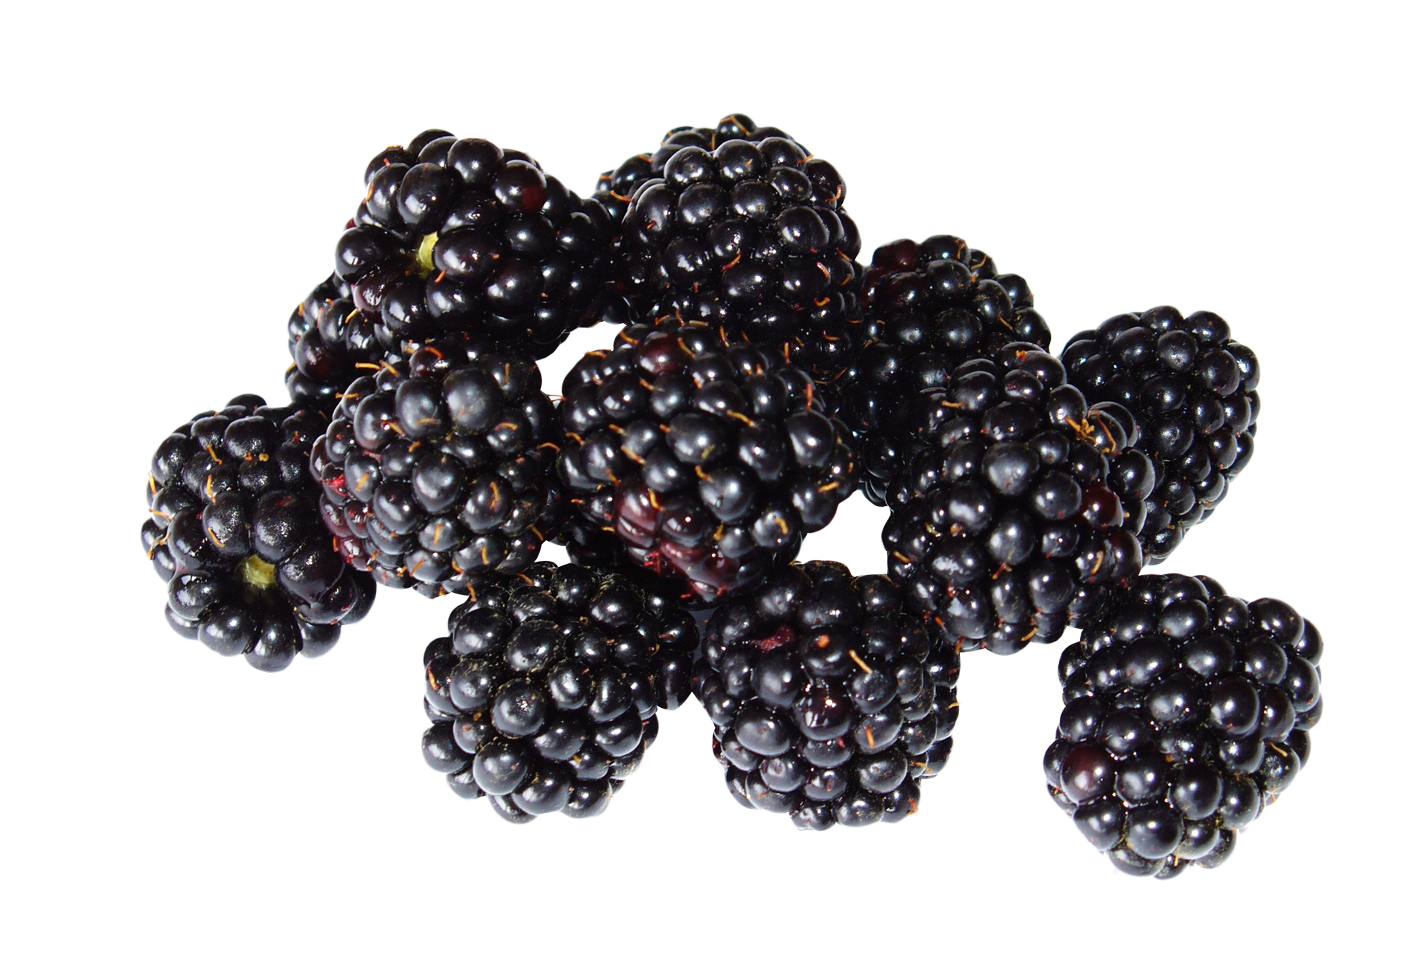 Blackberry Fruit PNG HD and HQ Image pngteam.com